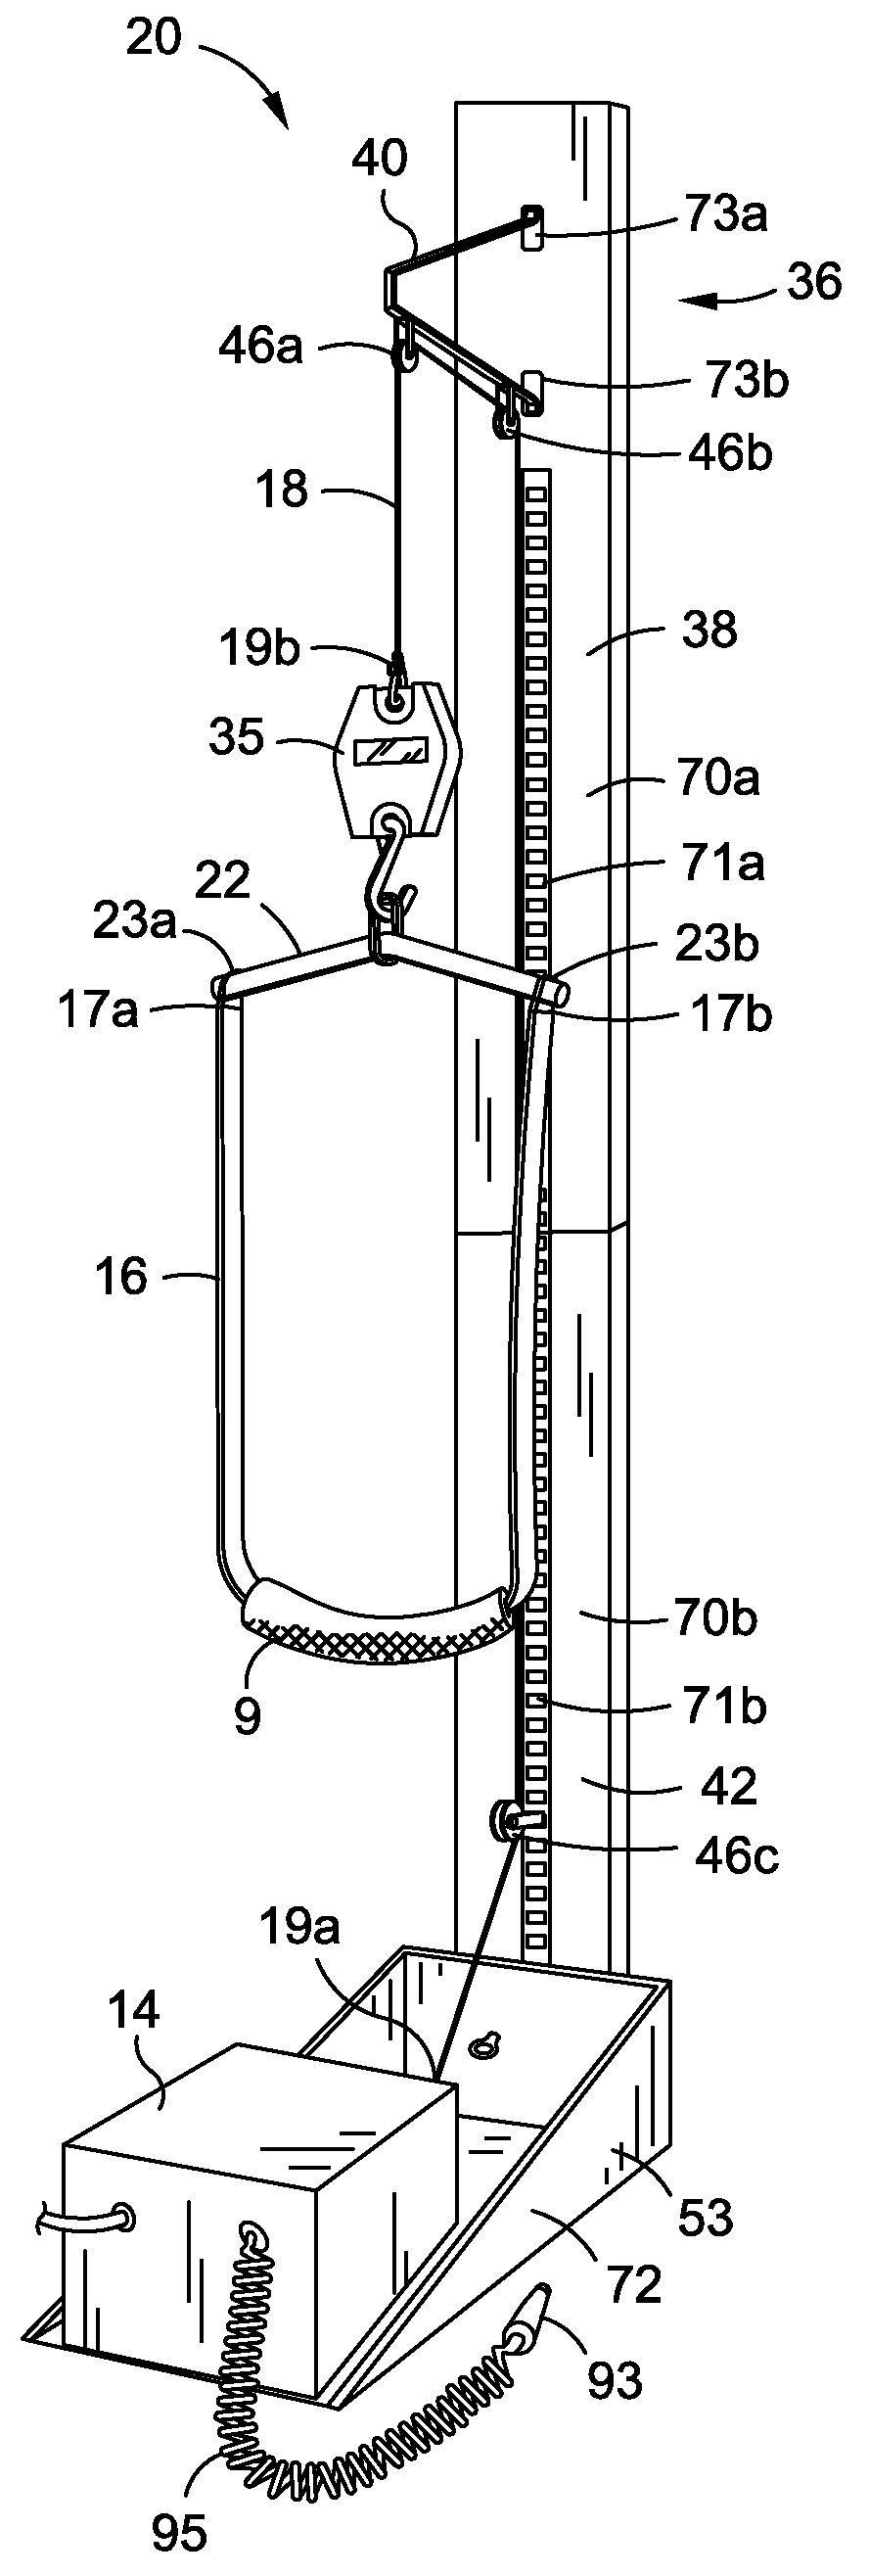 Cervical spine traction apparatus and method